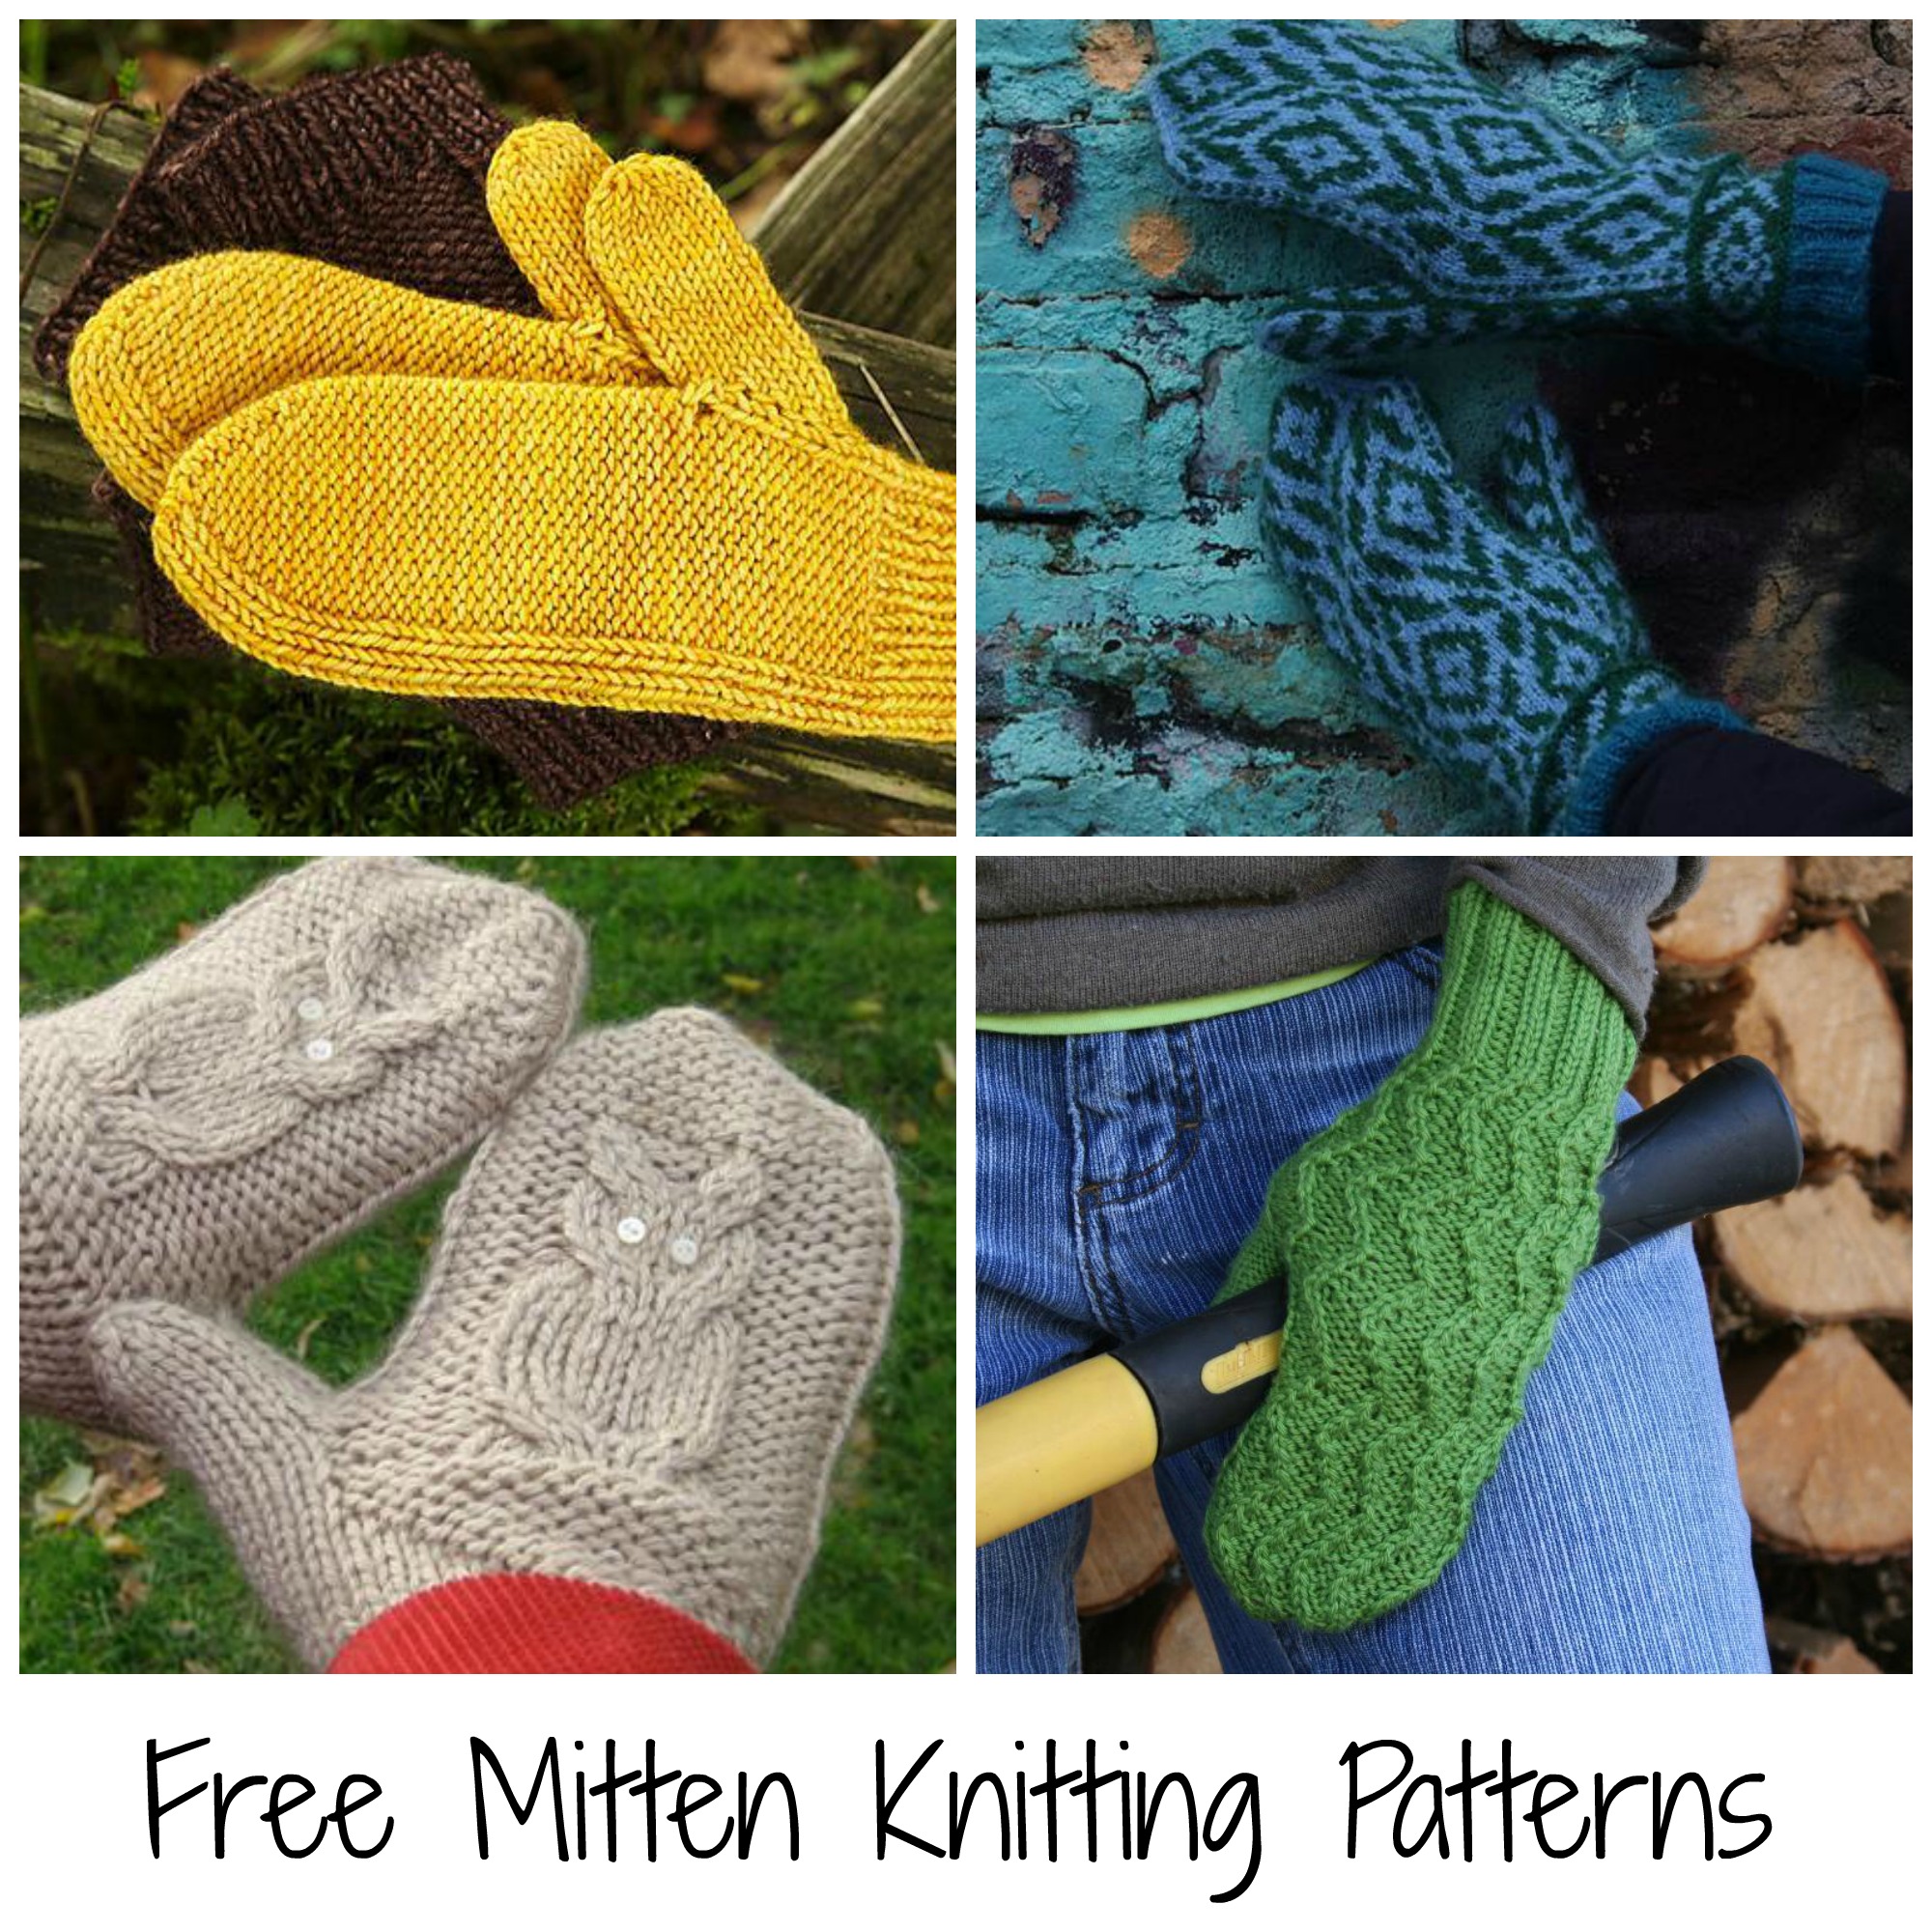 free knitting patterns for mittens on 4 needles